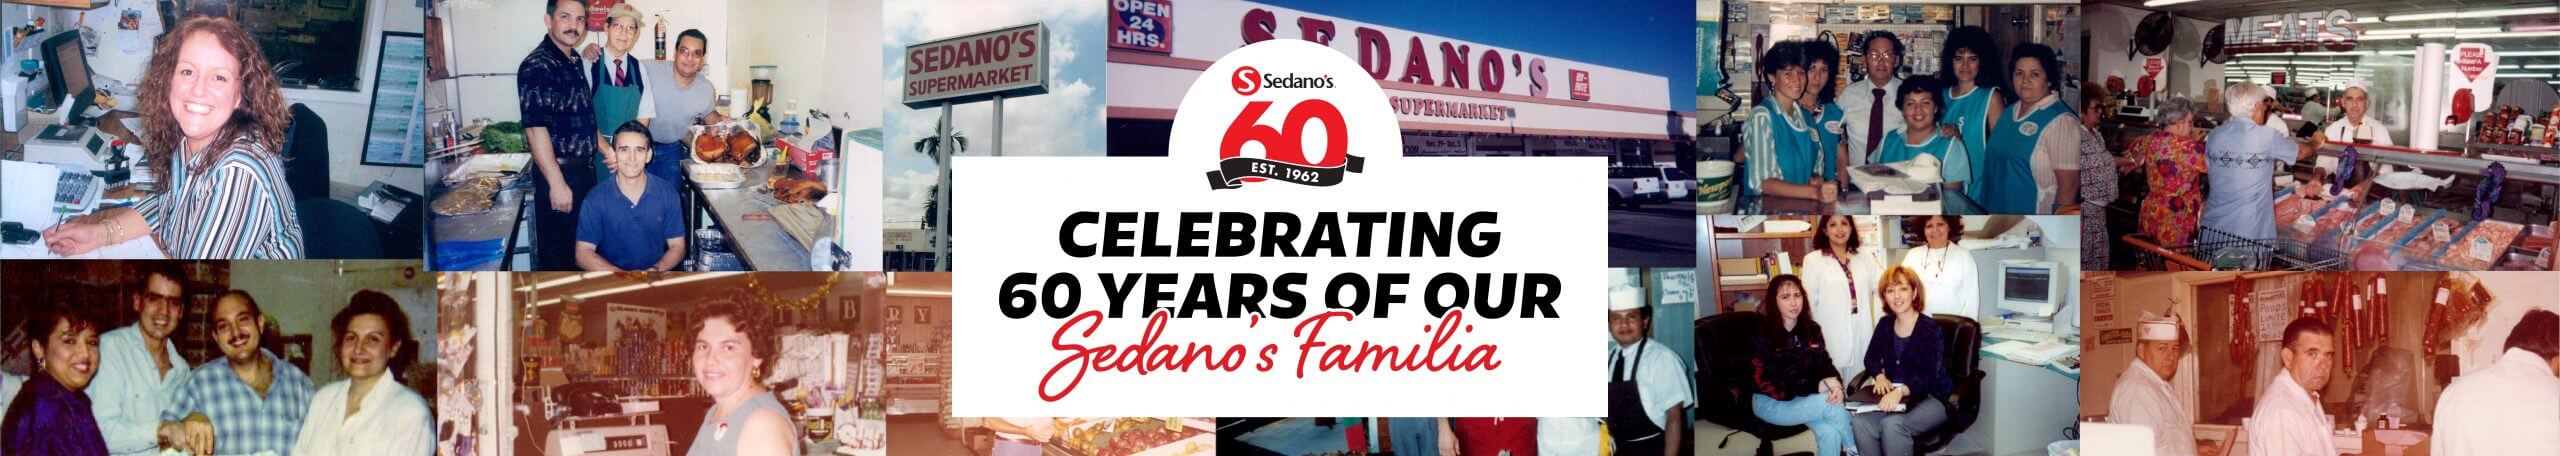 Sedanos.com | Free Pick Up and Same Day Grocery Delivery | Catering | 60 Years